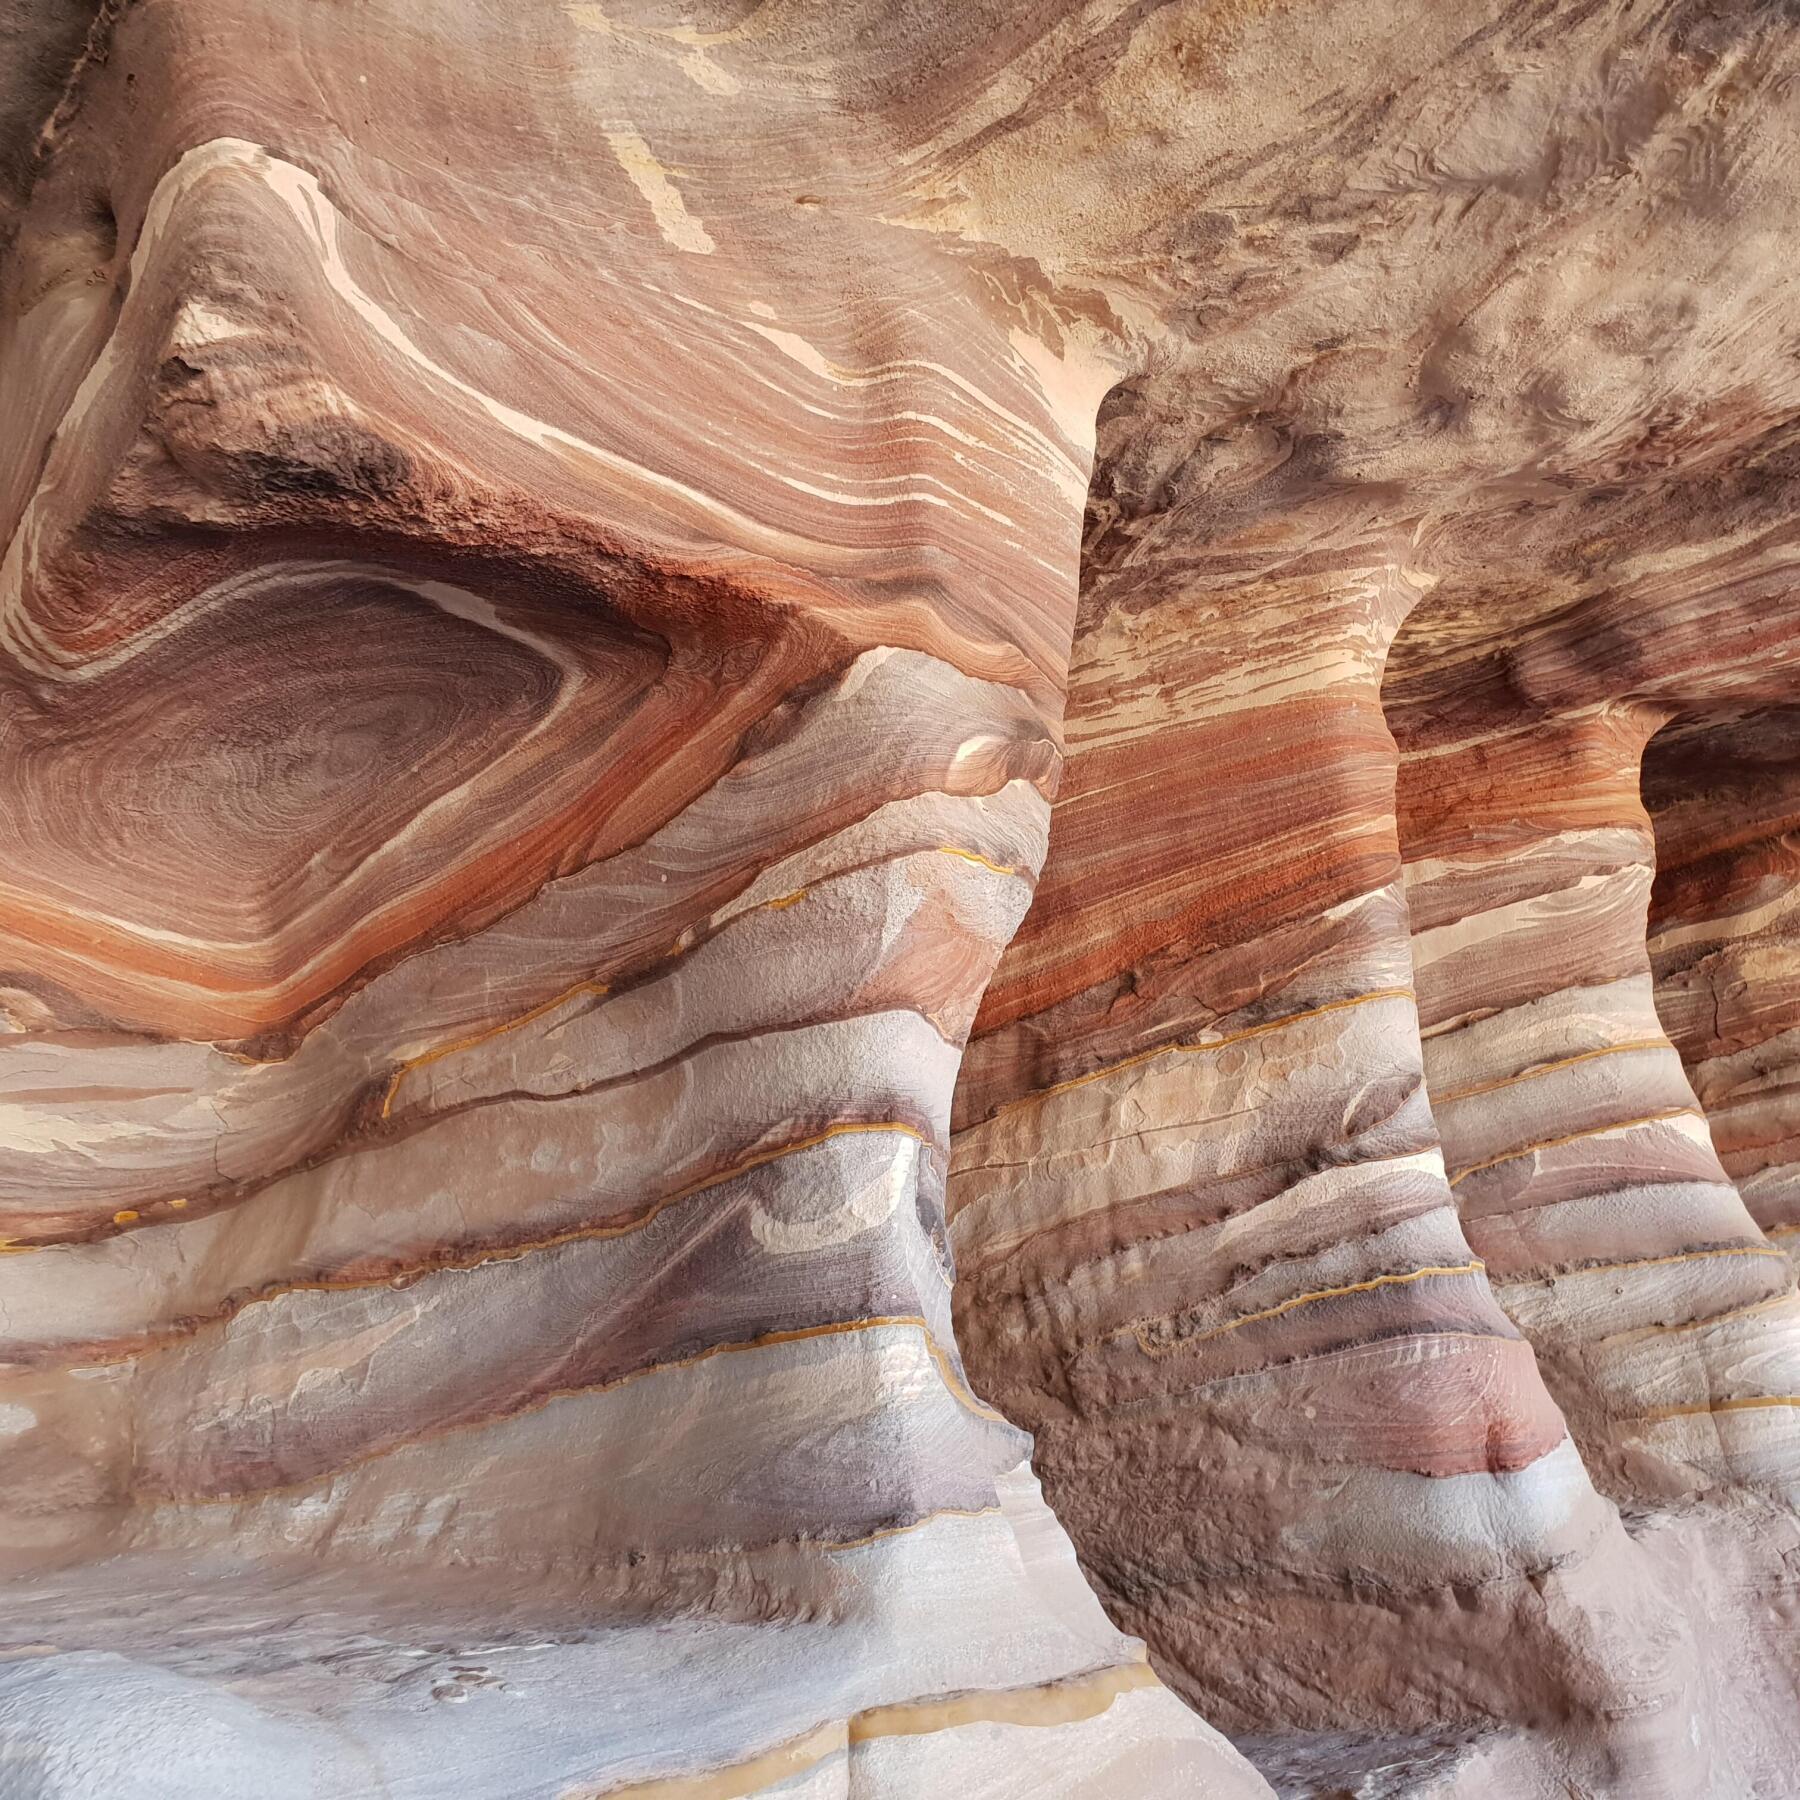 visiter petra et ses canyons